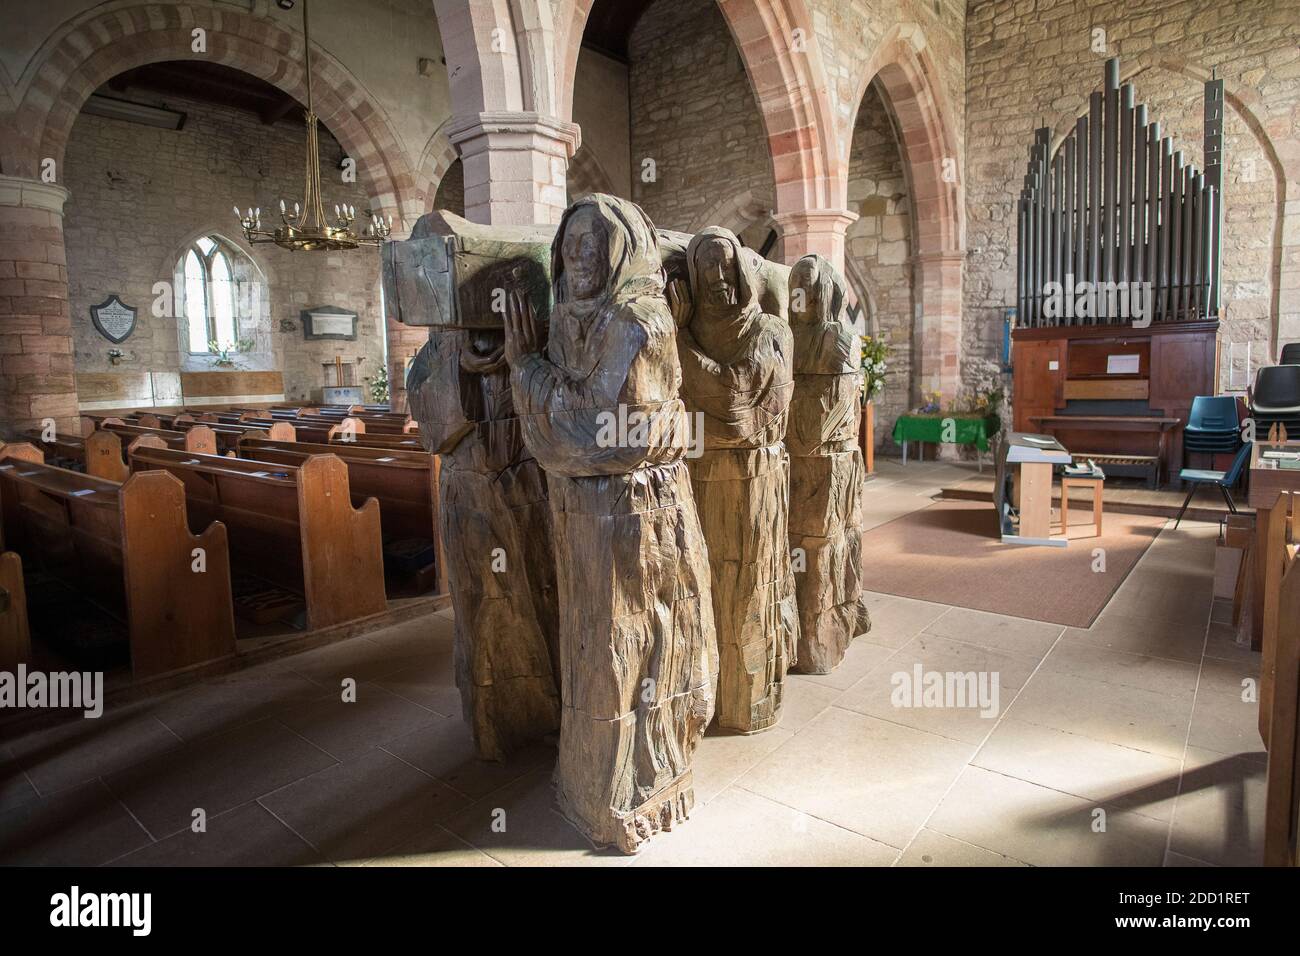 The Journey a wooden sculpture inside of St Mary's Church on the Holy Island of Lindisfarne, Northumberland, England. Stock Photo